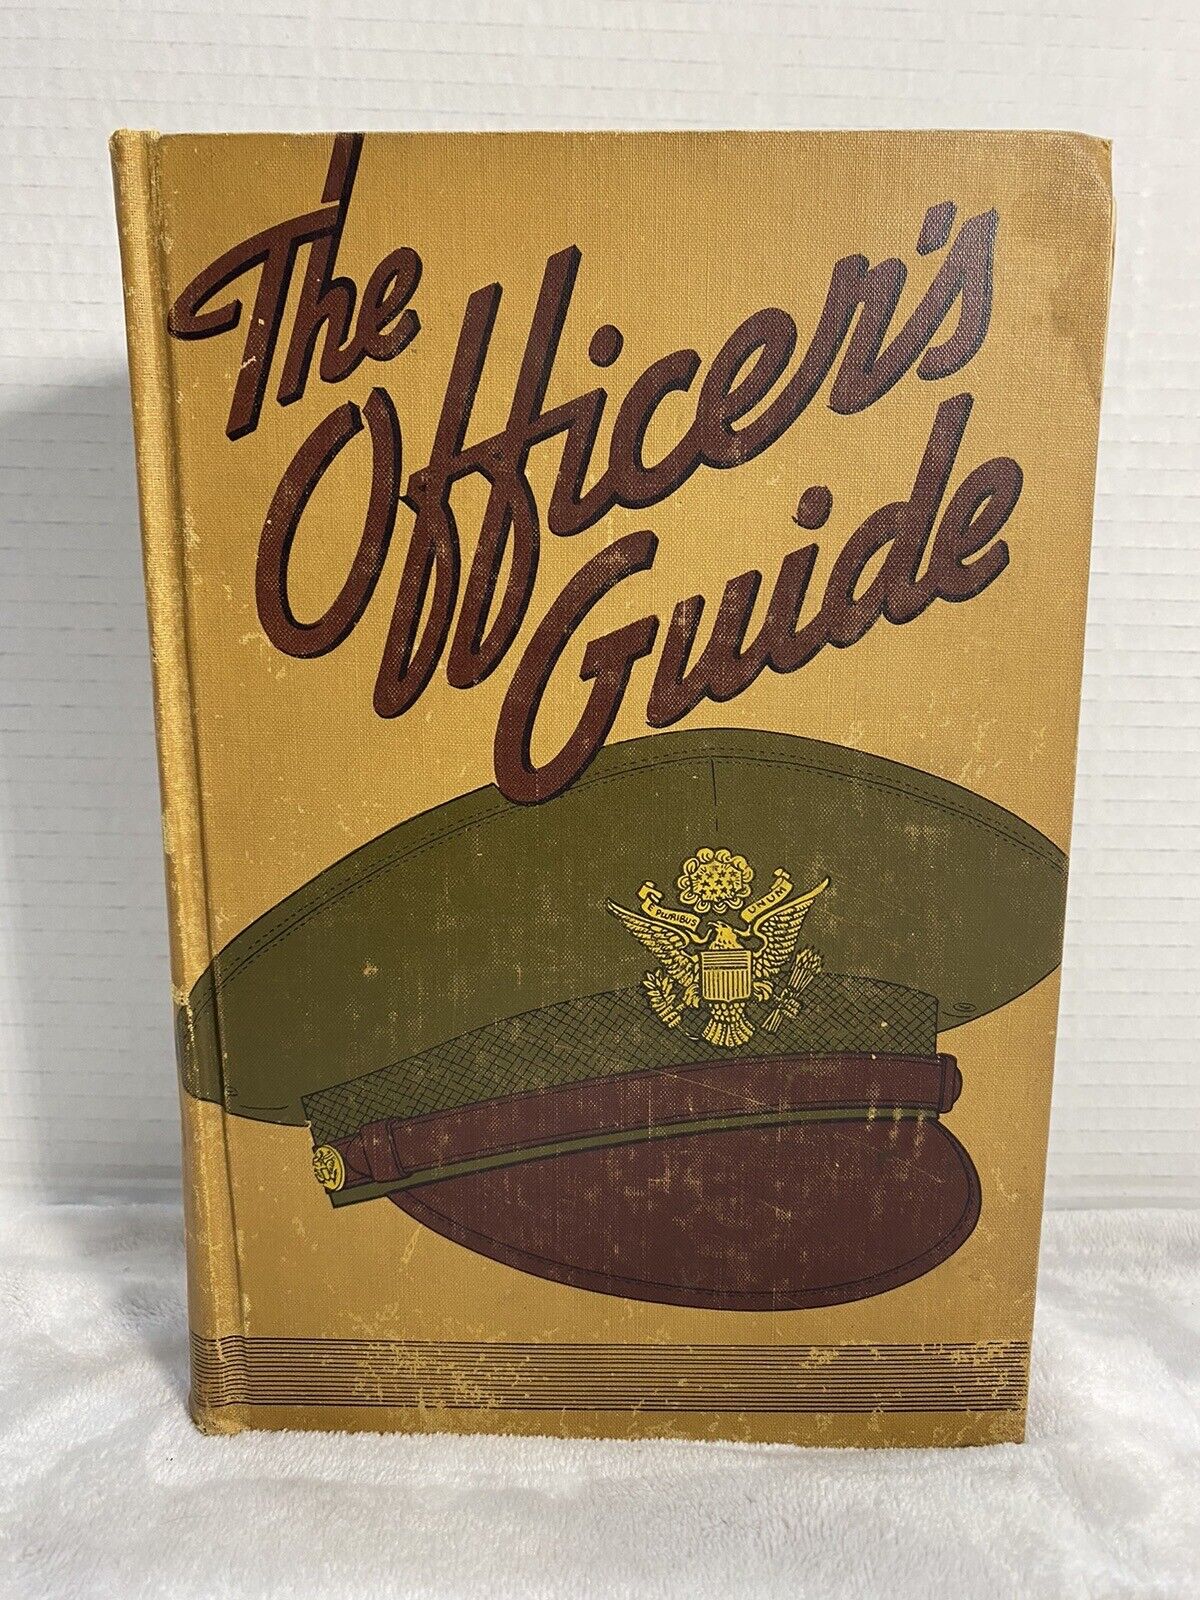 1944 The  Officer’s Guide Book. Vintage